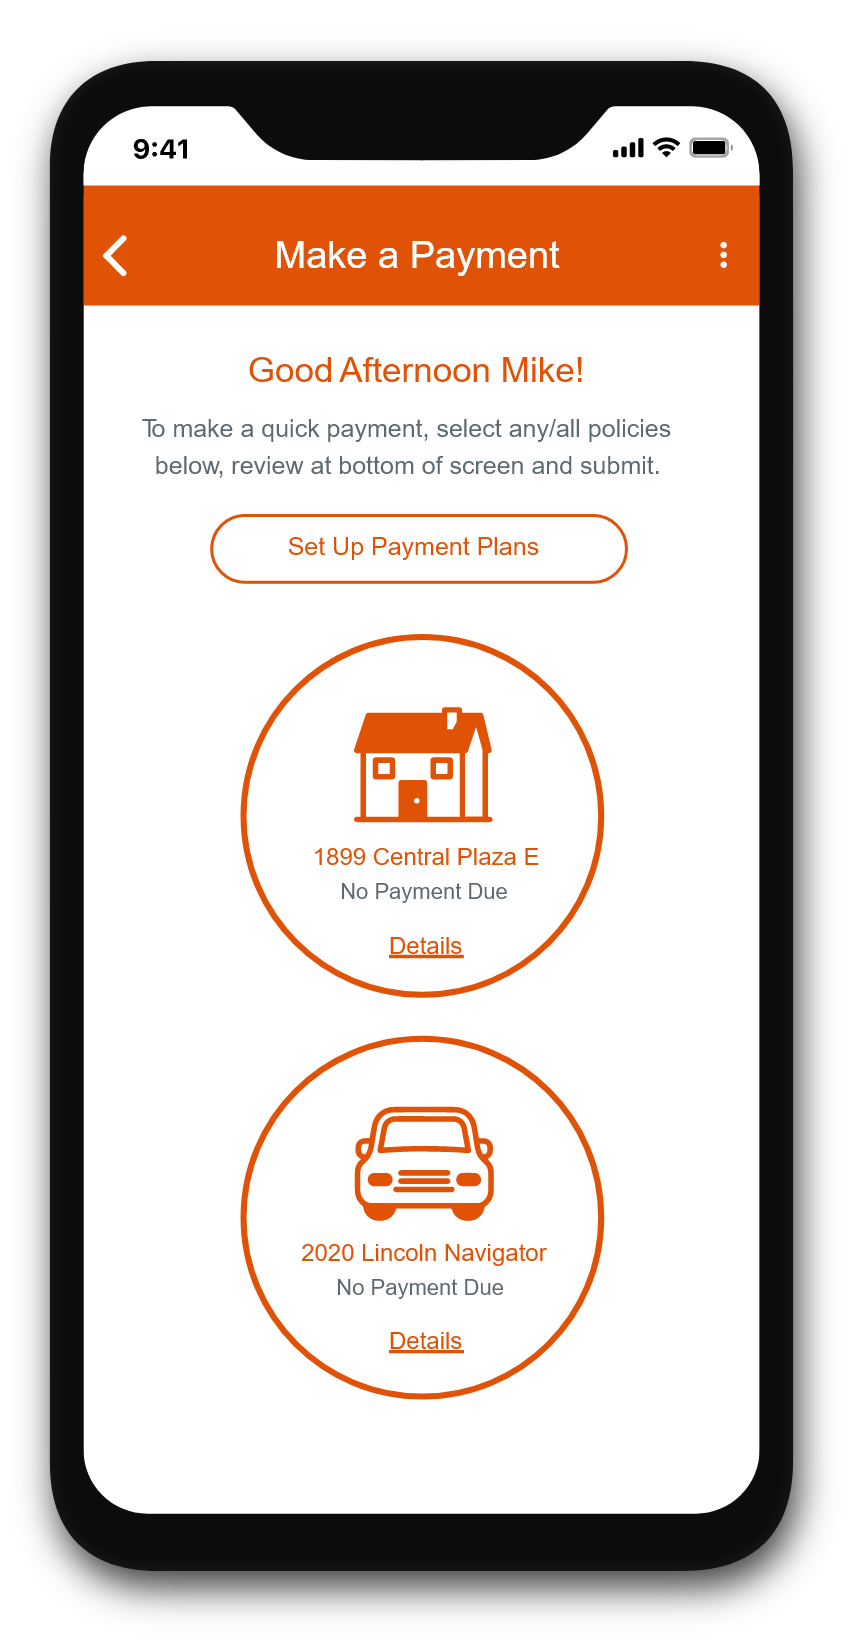 Image of app displaying make a payment screen